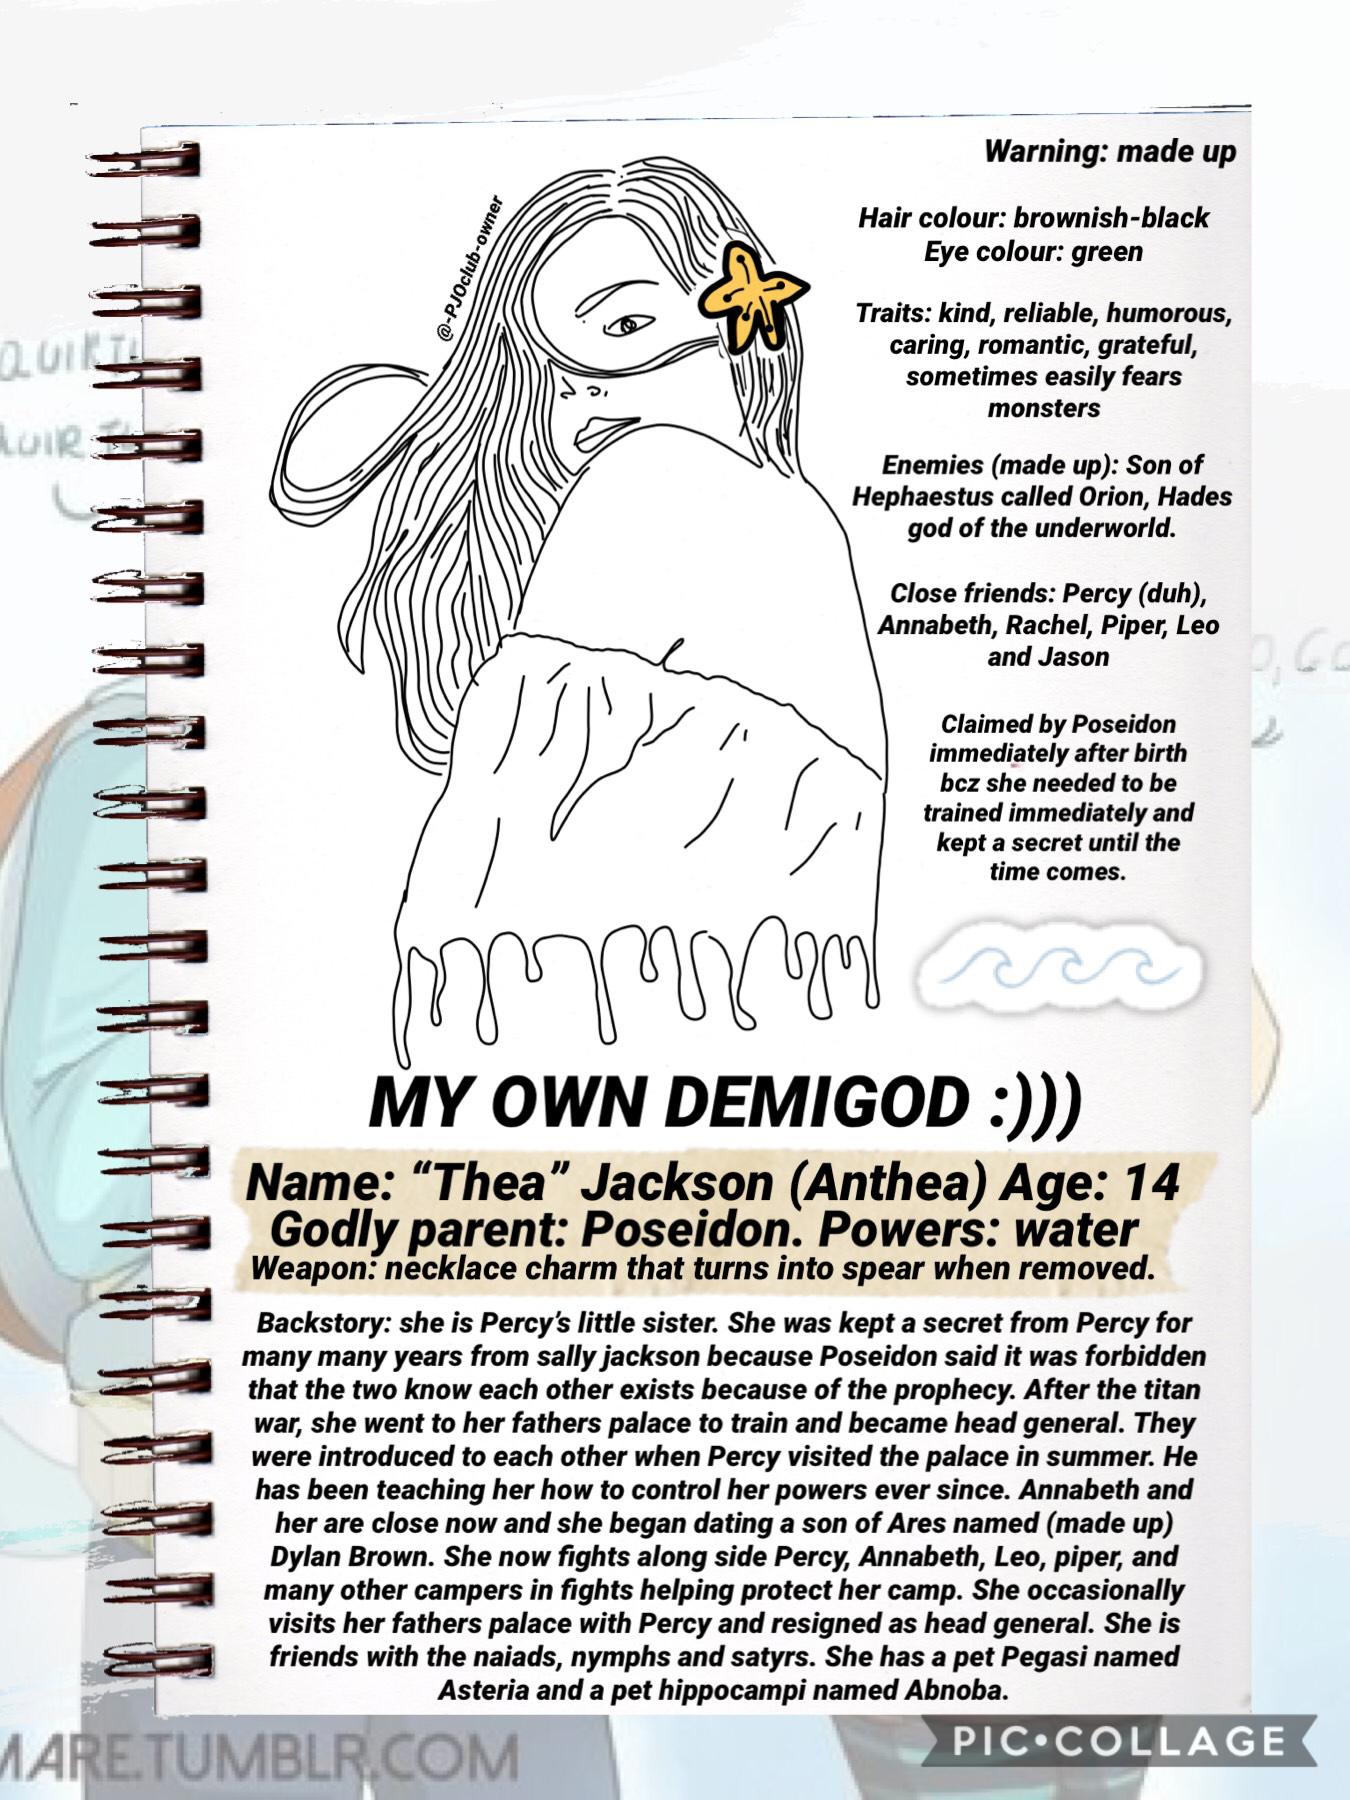 Ayeeee my own demigod :) QOTD: should I make this account for everyone to post their own demigods too?